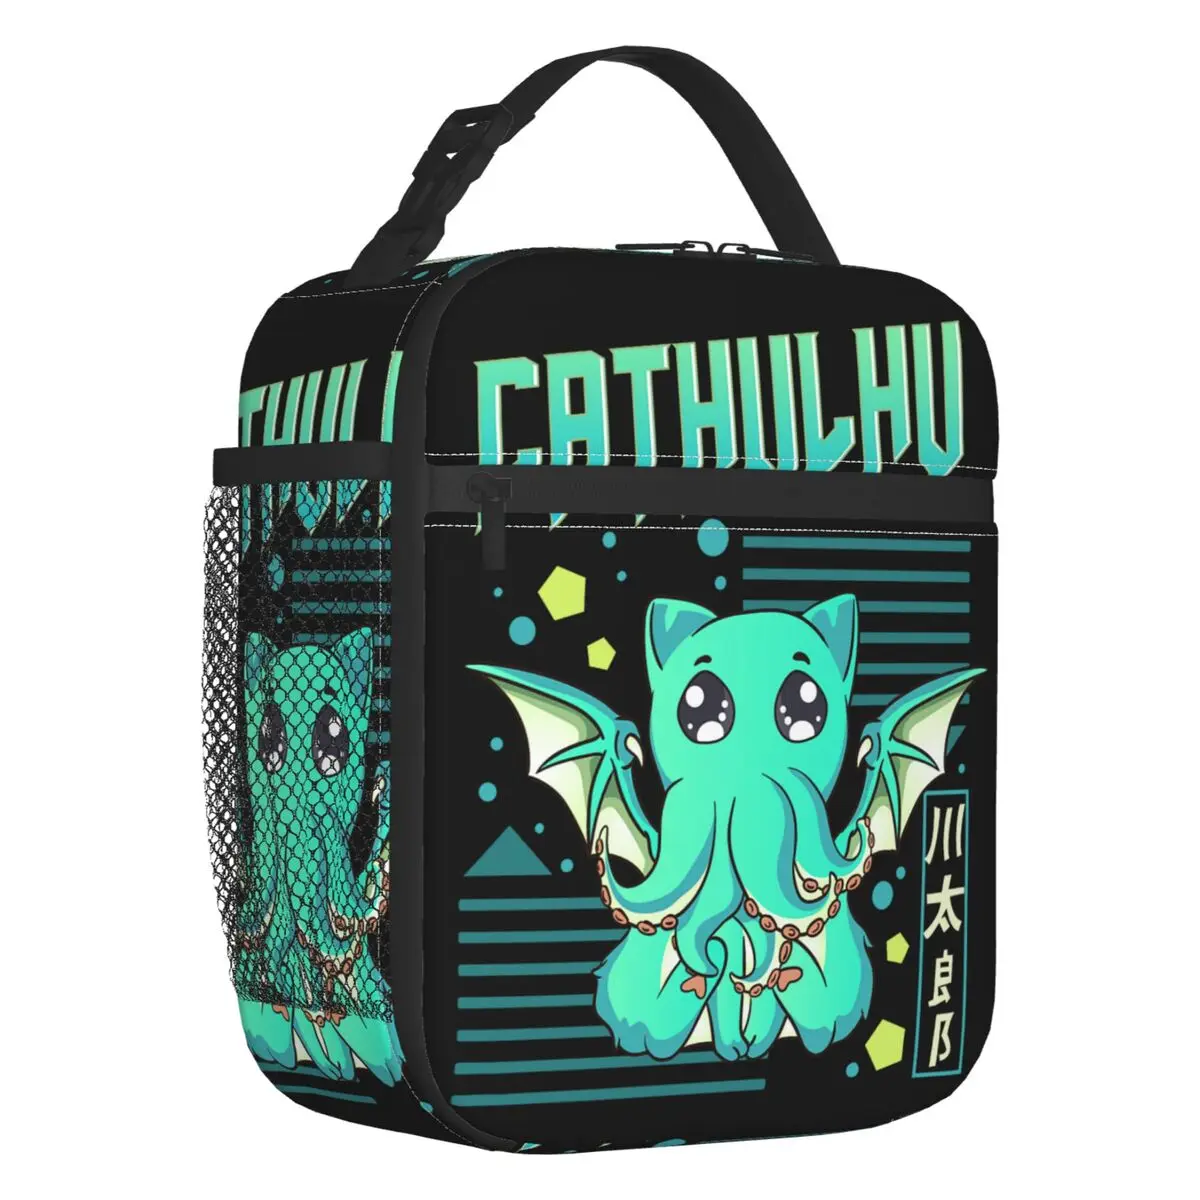 Anime Funny Cat Cthulhu Portable Lunch Box Leakproof Lovecraft Monster Thermal Cooler Food Insulated Lunch Bag Office Work